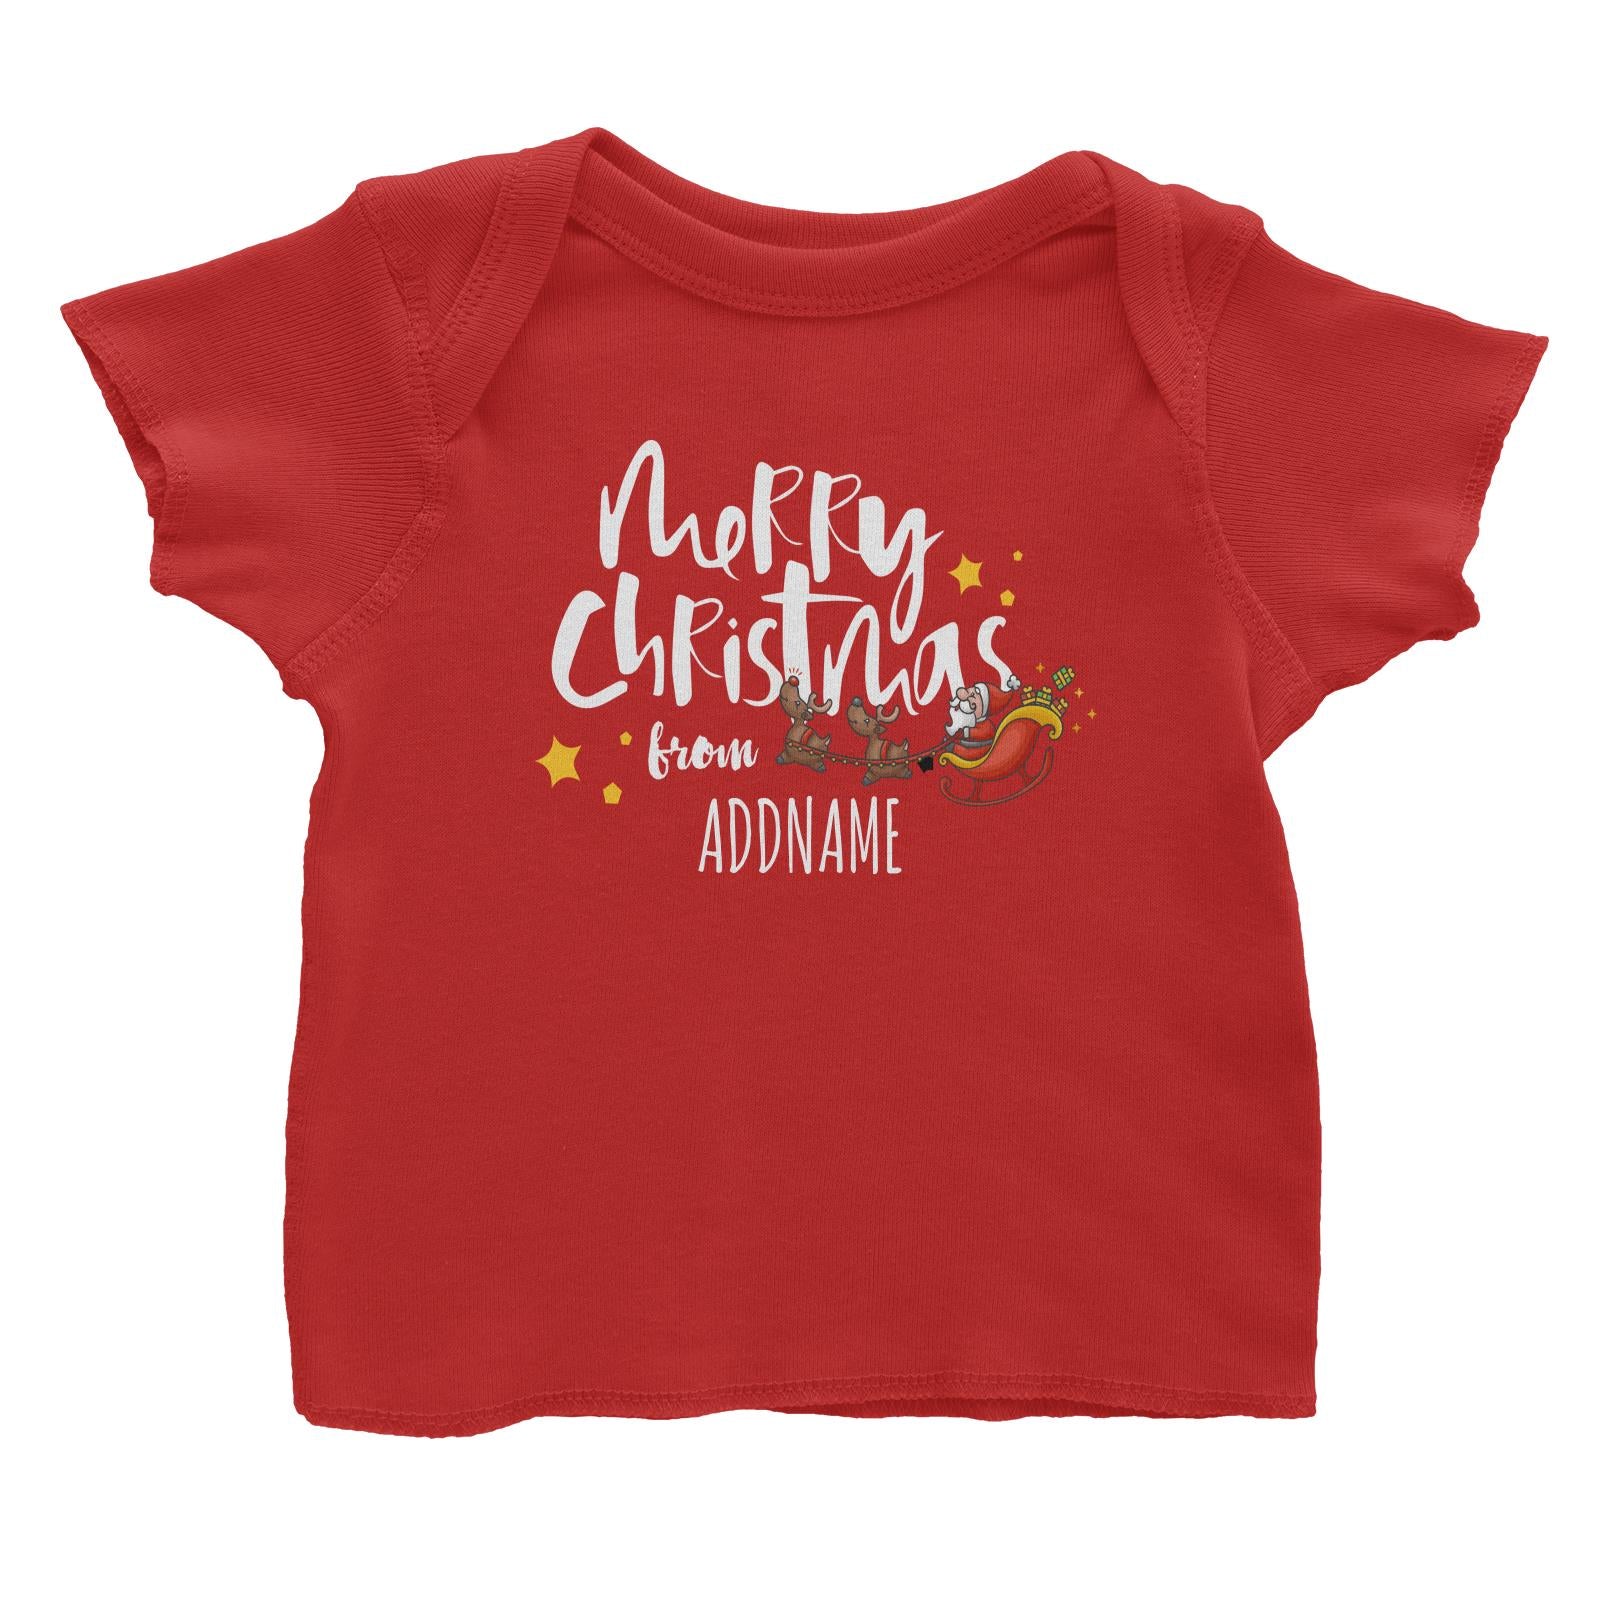 Cute Santa's Sleigh Merry Christmas Greeting Addname Baby T-Shirt  Personalizable Designs Matching Family